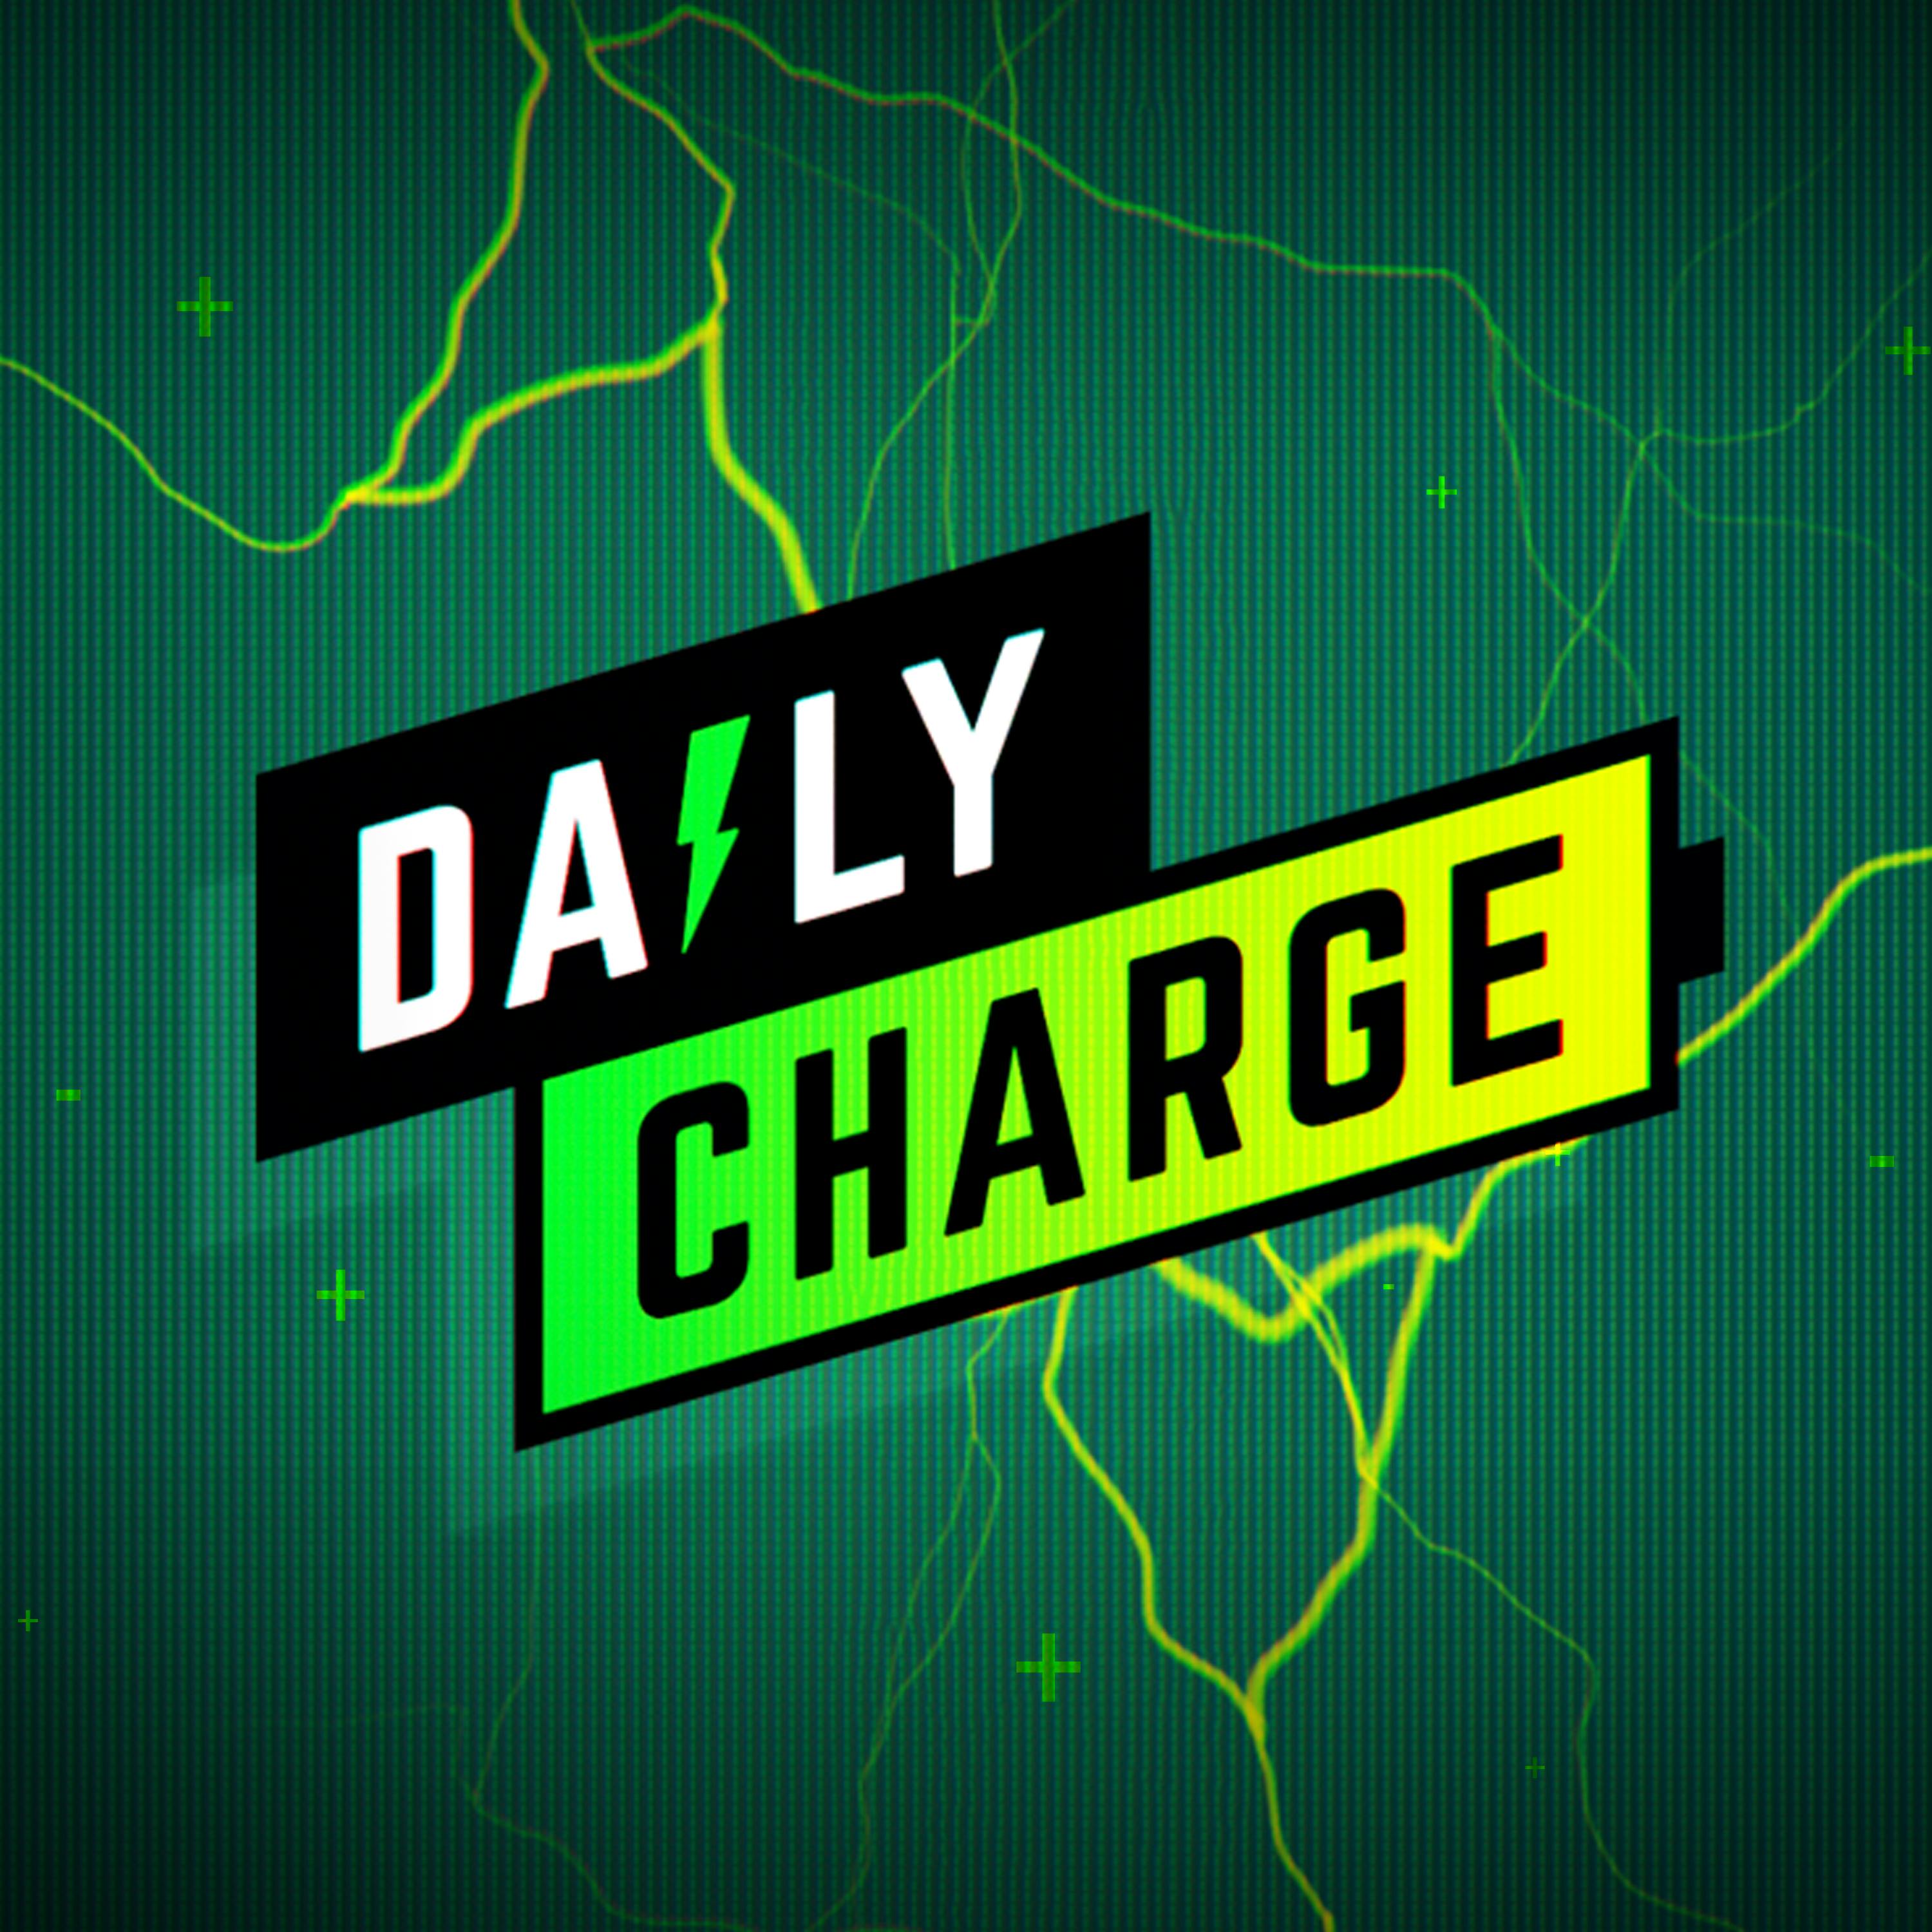 Google loosens its grip on the Play Store (The Daily Charge, 3/24/2022)